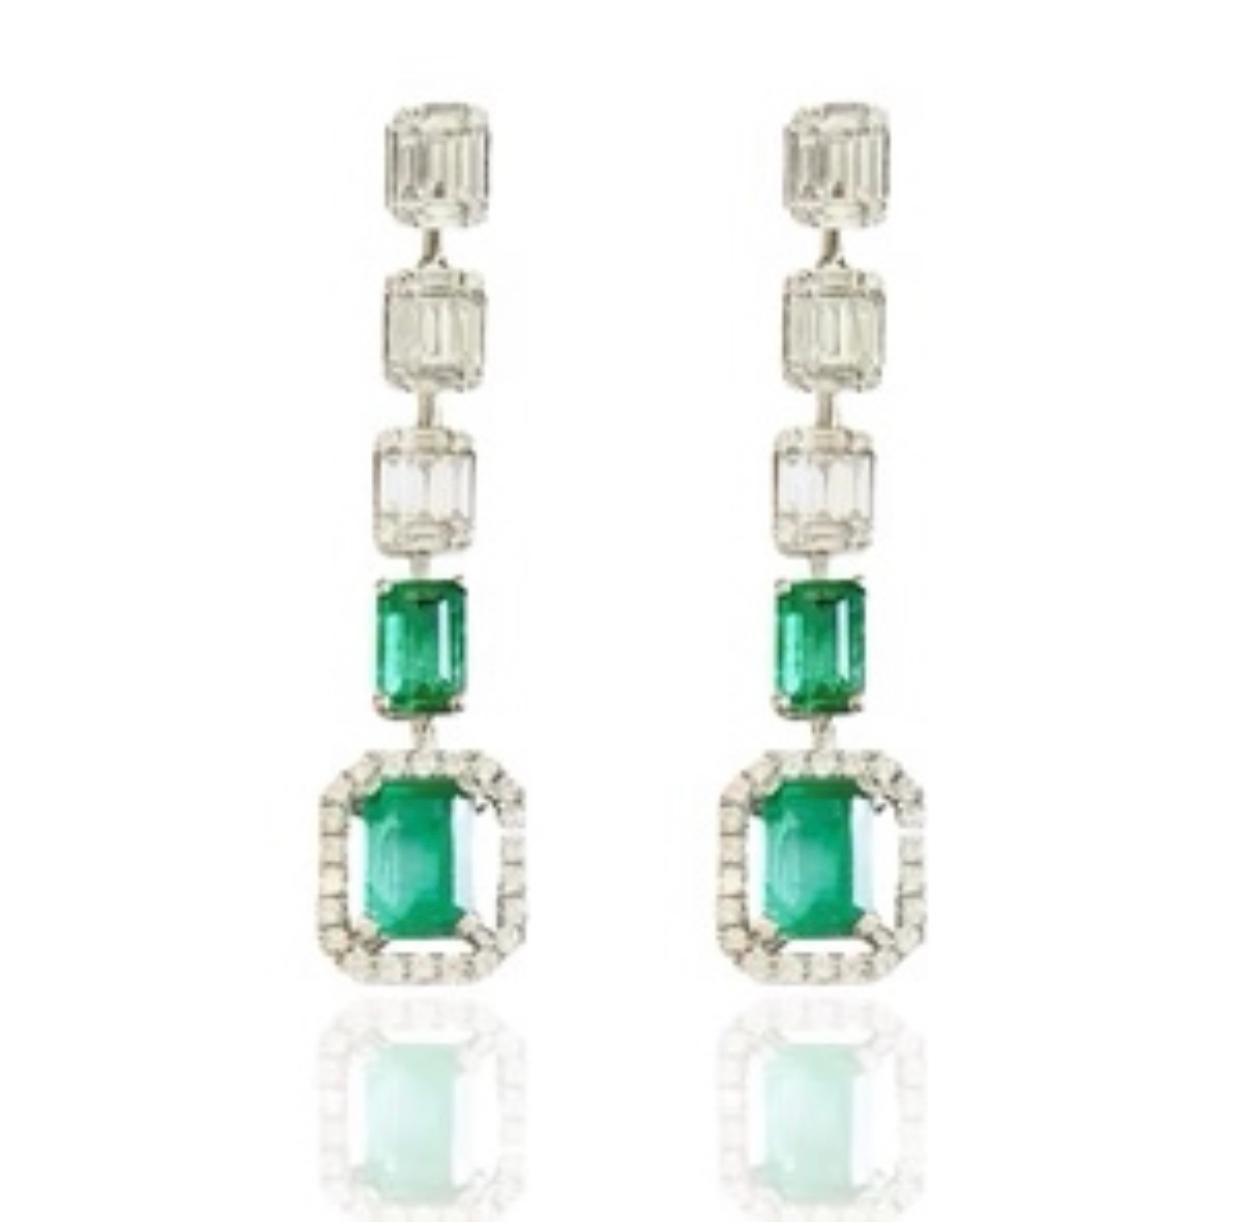 Emerald and Diamond Ava Earrings 
Emerald cut Diamond studs set in 18k White Gold with four Emerald cut drops, two in Diamond and two in Emerald. The last drop surrounded by brilliant round cut diamonds. 

These earrings make a timeless statement